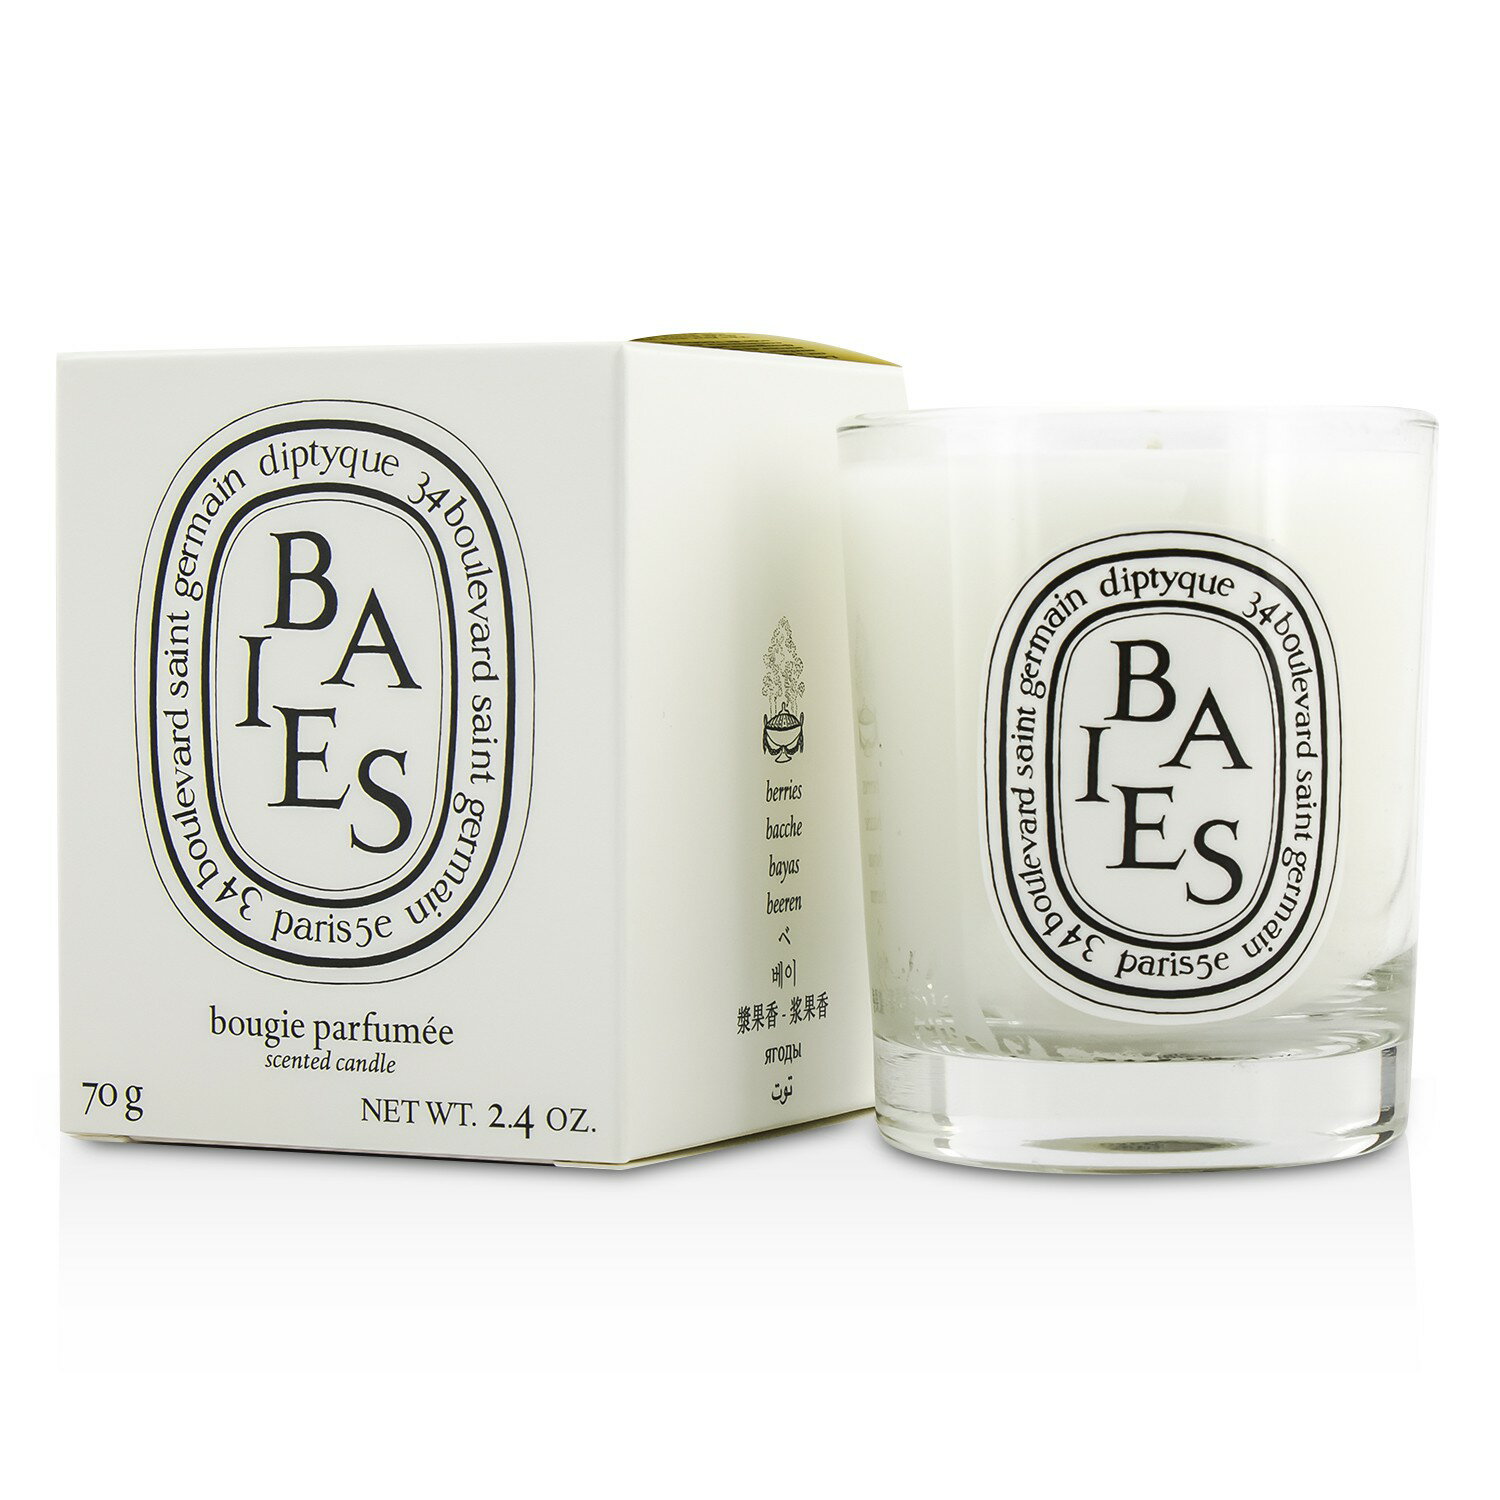 Diptyque - 漿果香 迷你香氛蠟燭 Scented Candle - Baies (Berries)